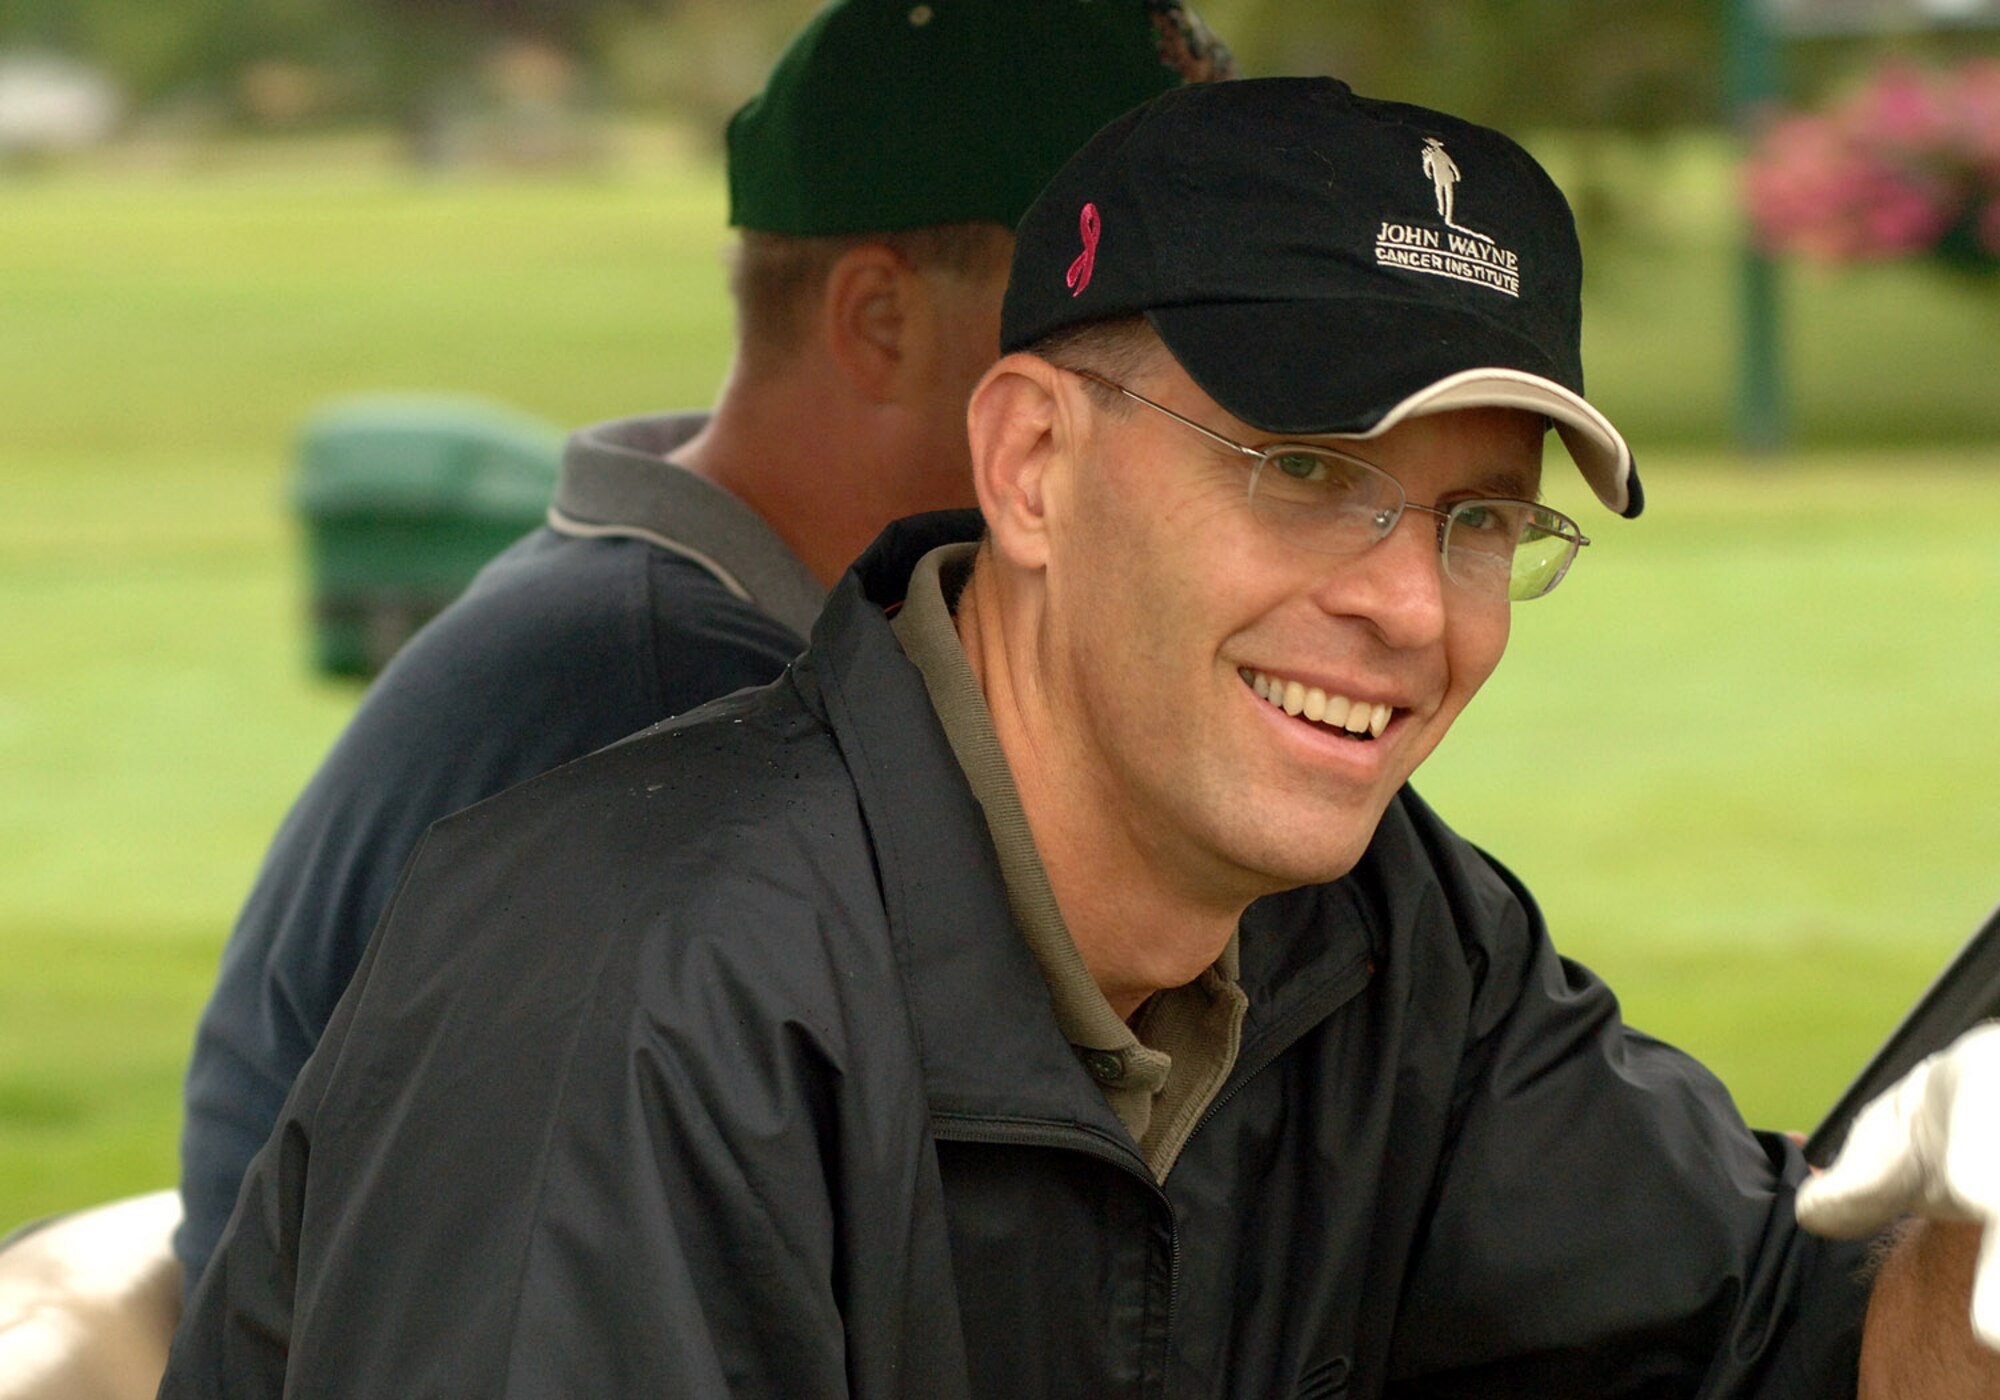 GRAND FORKS AIR FORCE BASE, N.D. -- Col. Bobby Fowler, 319th Operations Group commander, grins encouragingly to his teammate during the annual Grand Forks Military Appreciation Committee golf tournament. Teams comprised of both military and civilian leaders, spent the morning of Aug. 6 in friendly competition including longest drive, longest putt and closest to the hole contests. (U.S. Air Force photo/Senior Airman SerMae Lampkin)